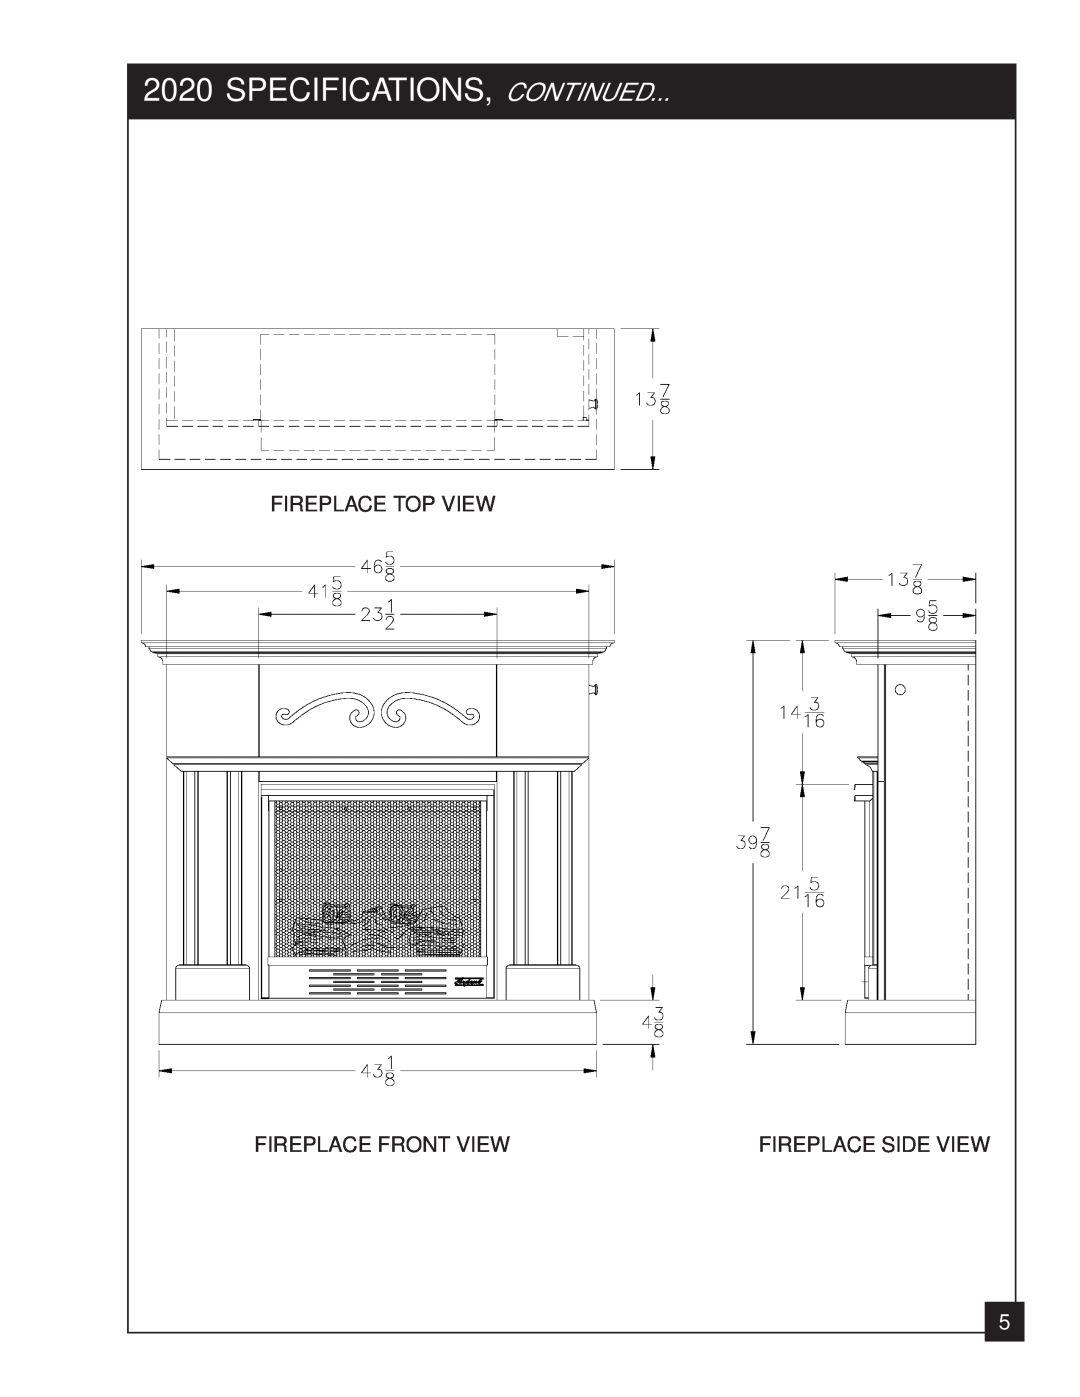 United States Stove 2020N manual Specifications, Continued, Fireplace Top View, Fireplace Front View, Fireplace Side View 